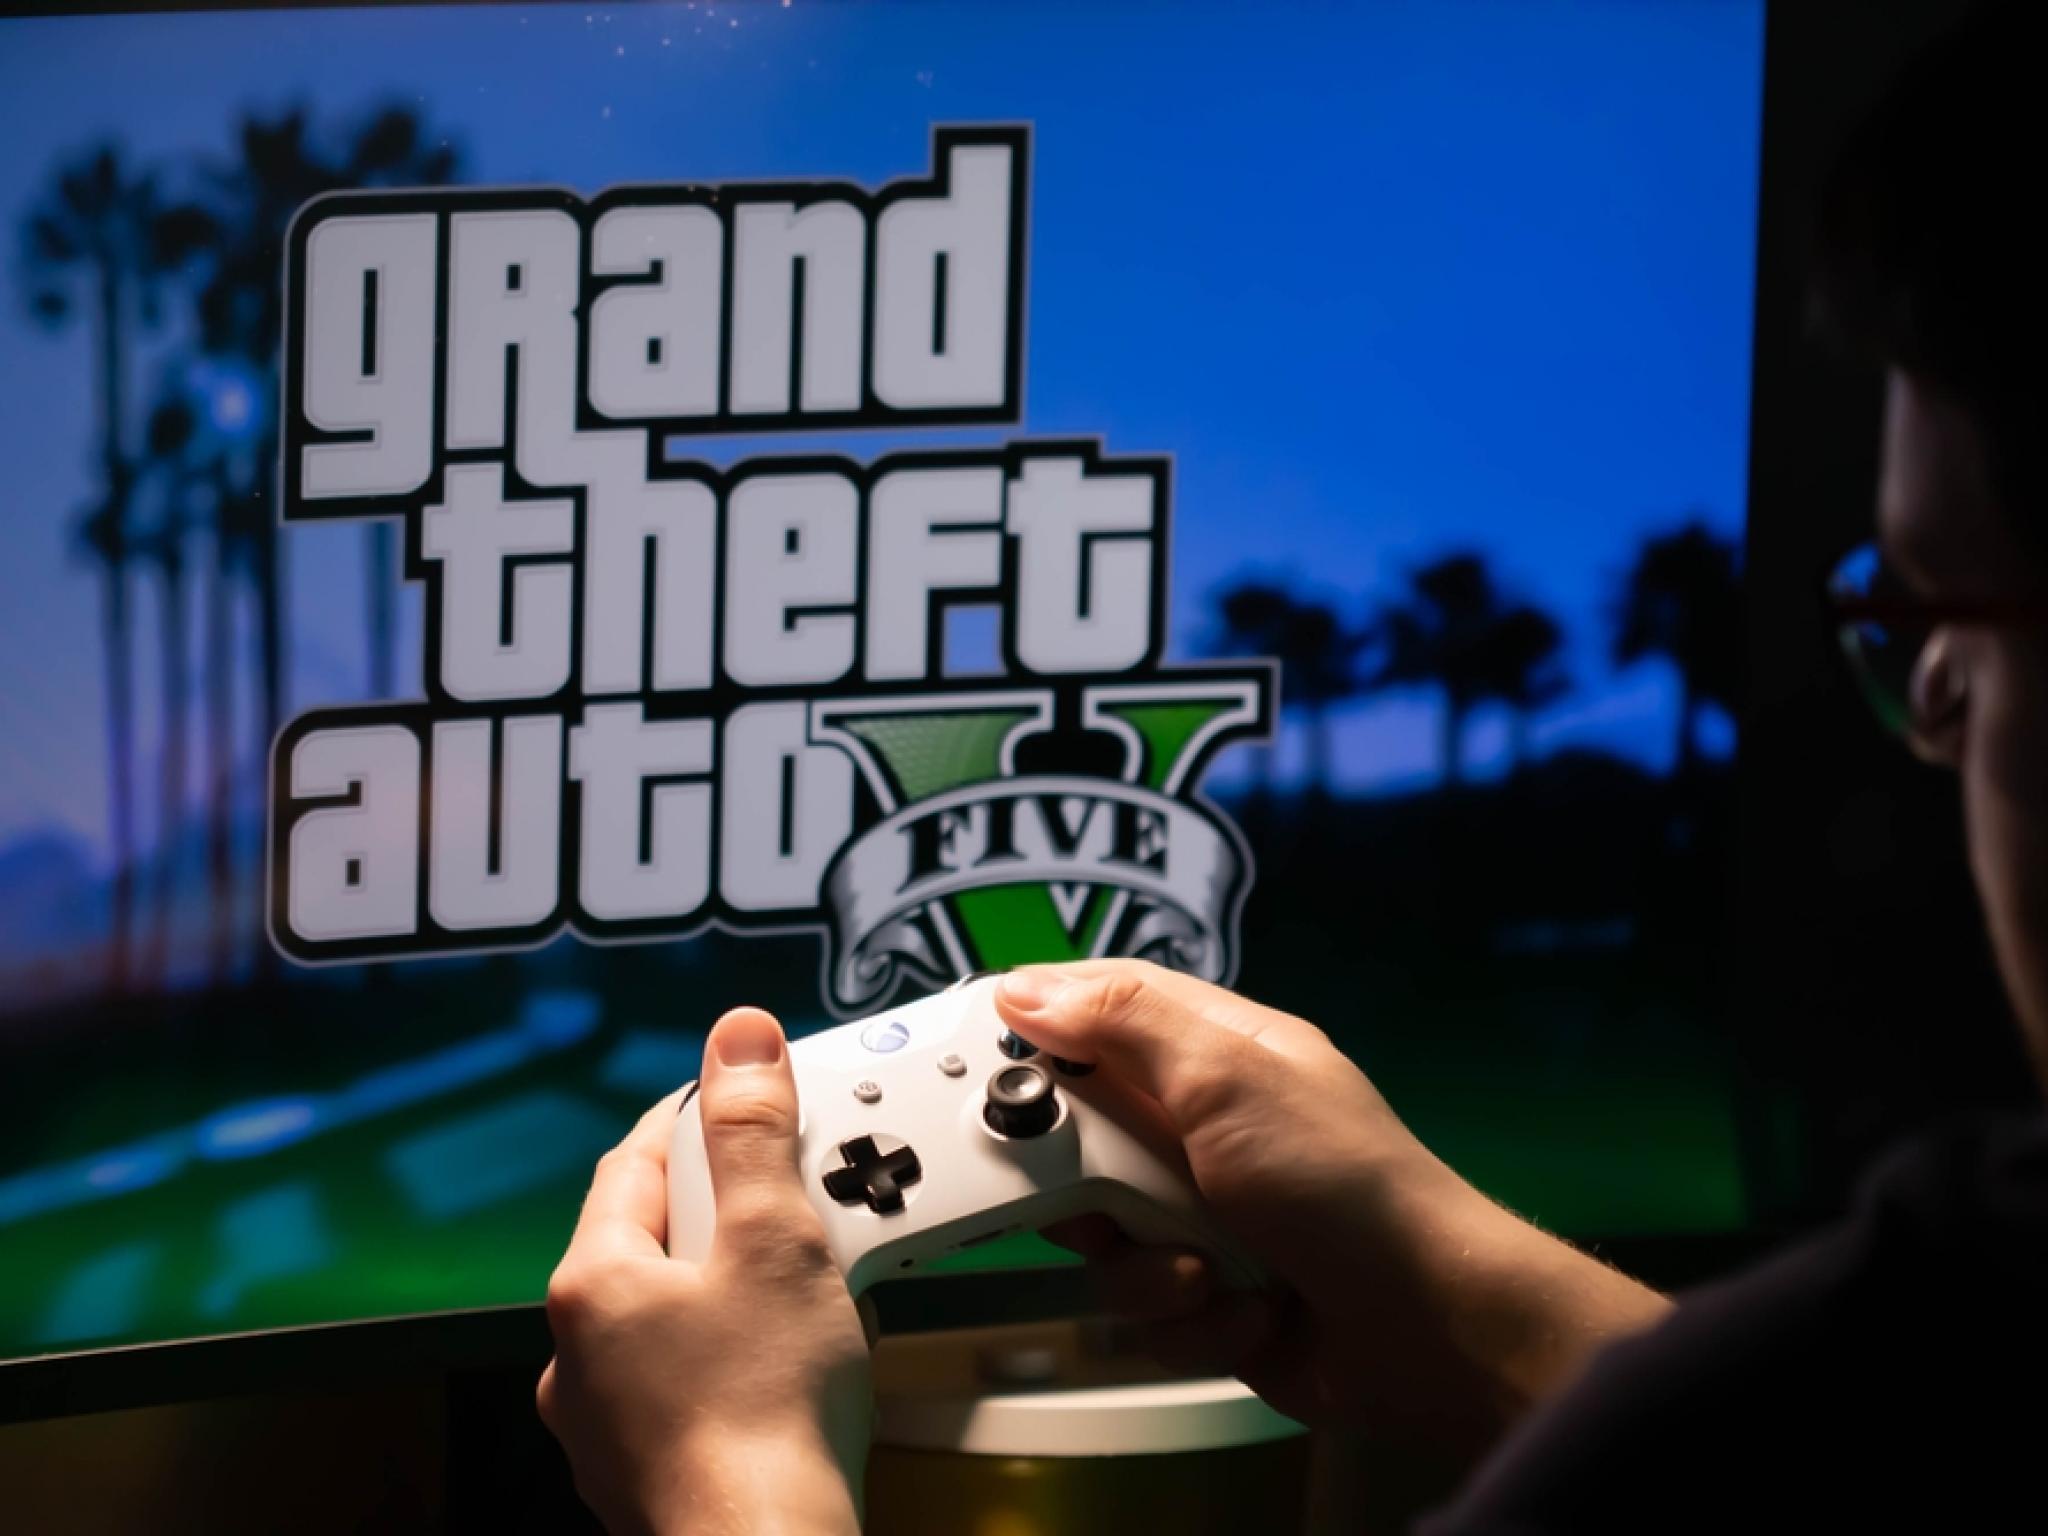  gta-5s-kick-a---story-canceled-due-to-cash-cow-success-online-says-former-dev 